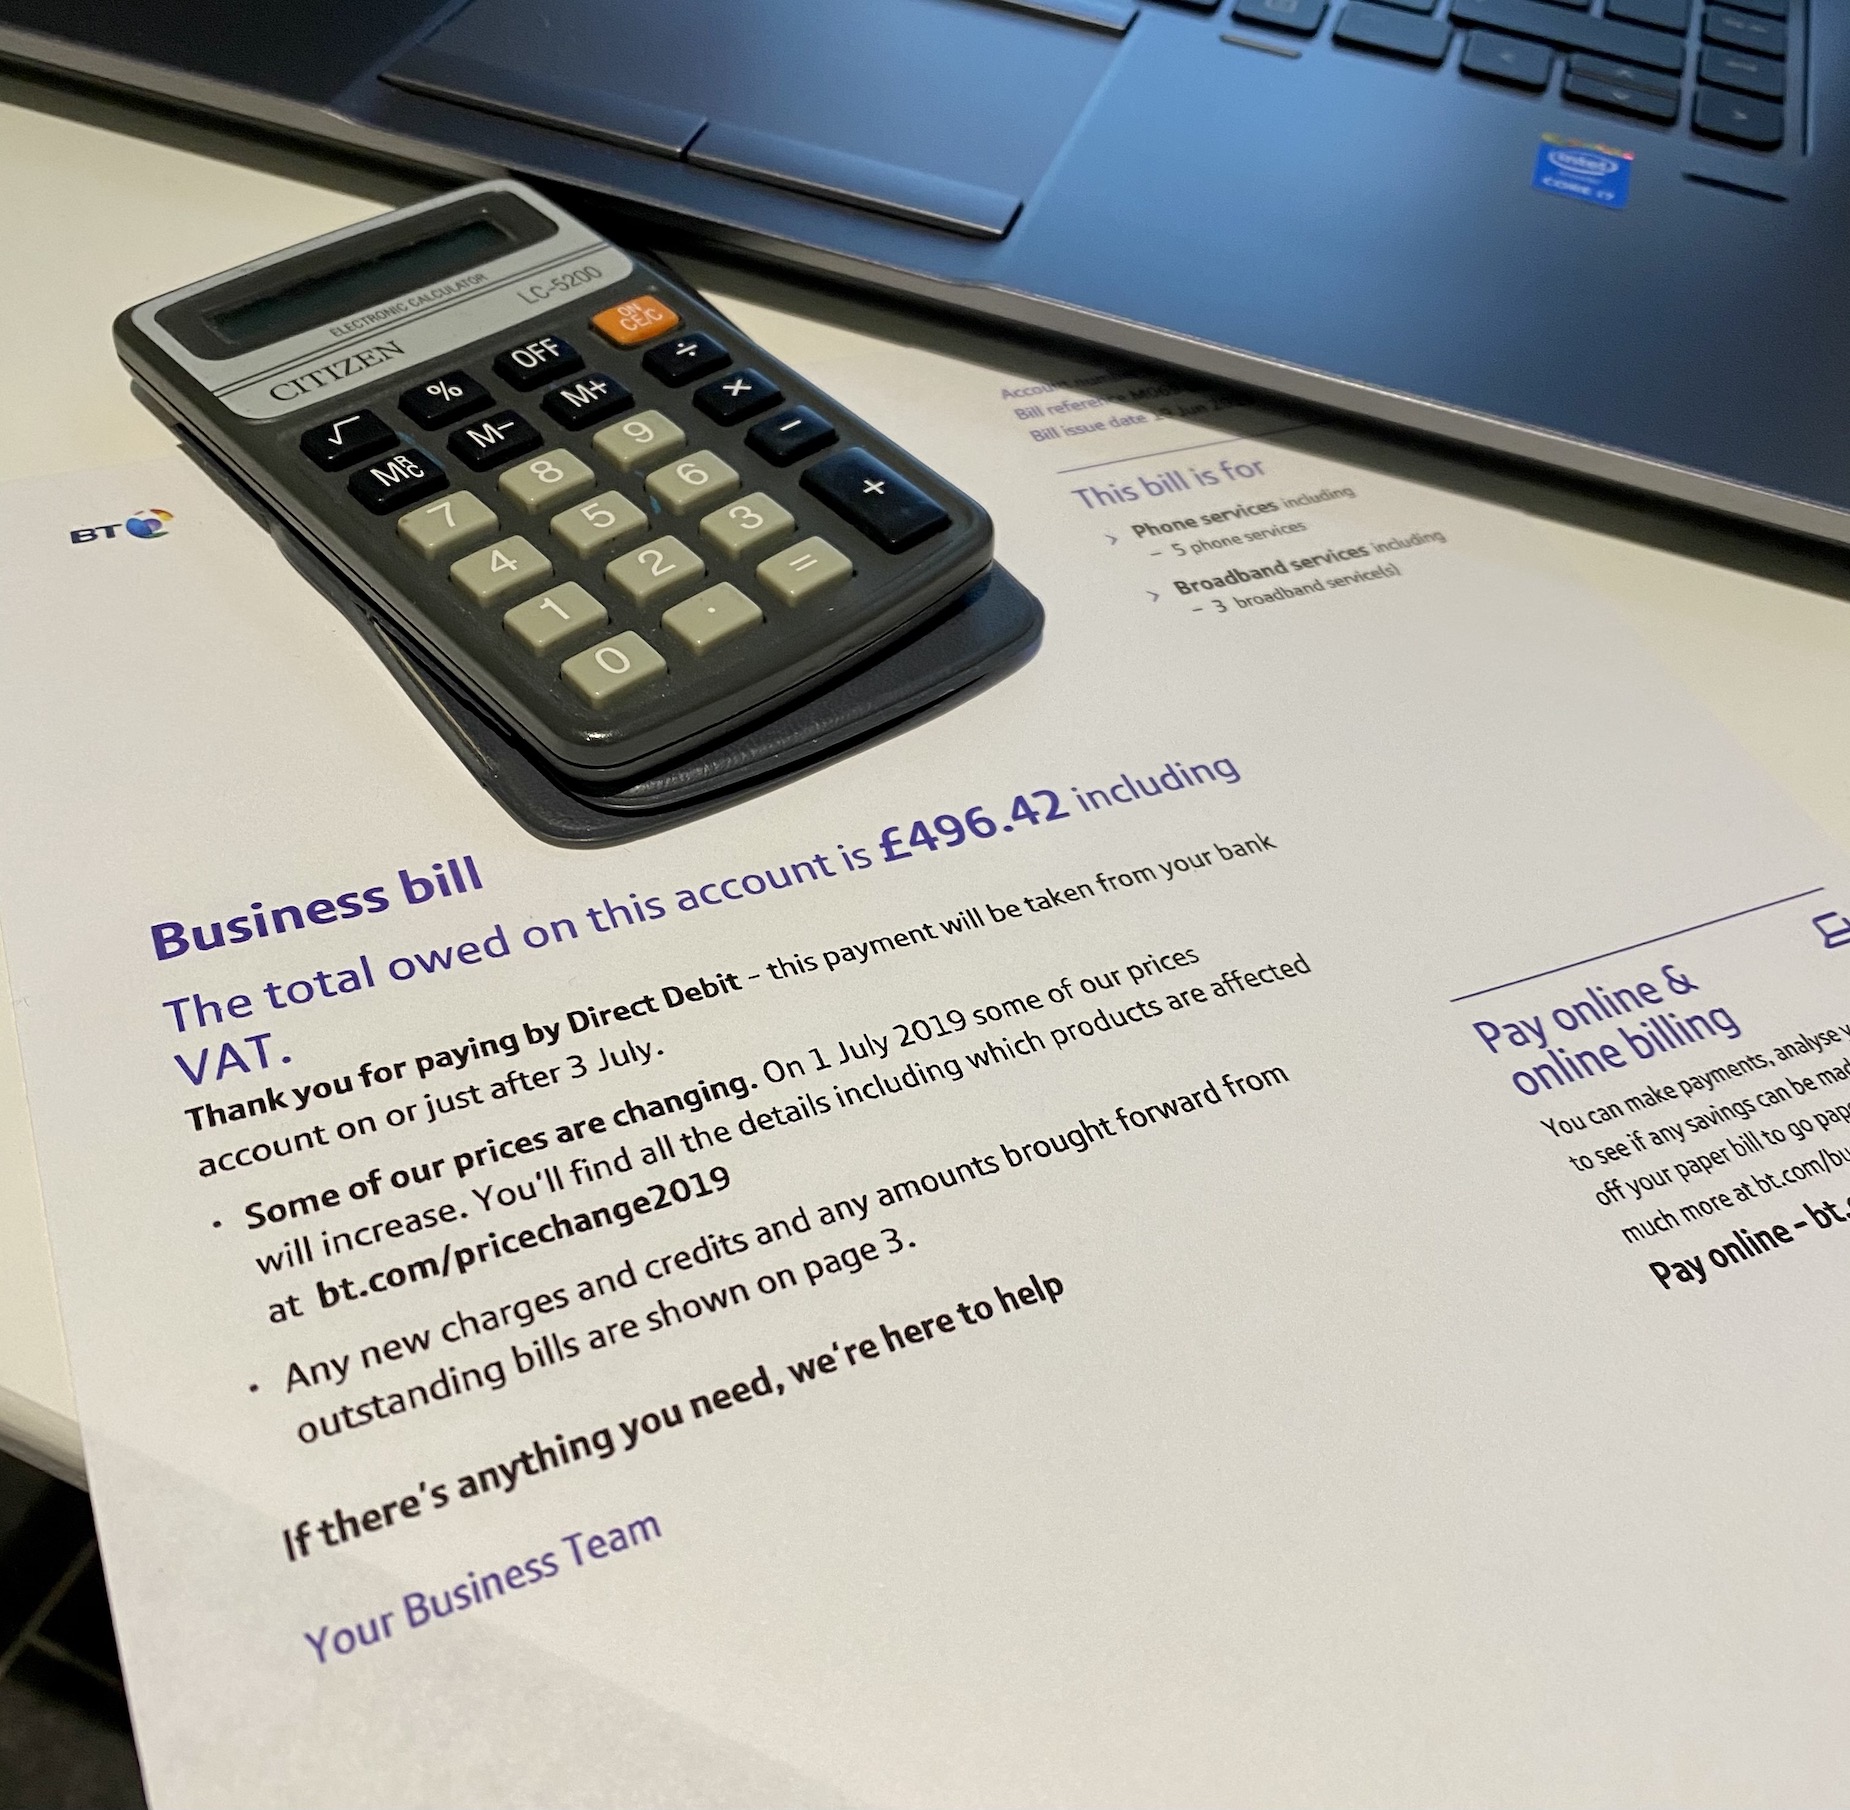 Copy of a business BT phone bill with a calculator